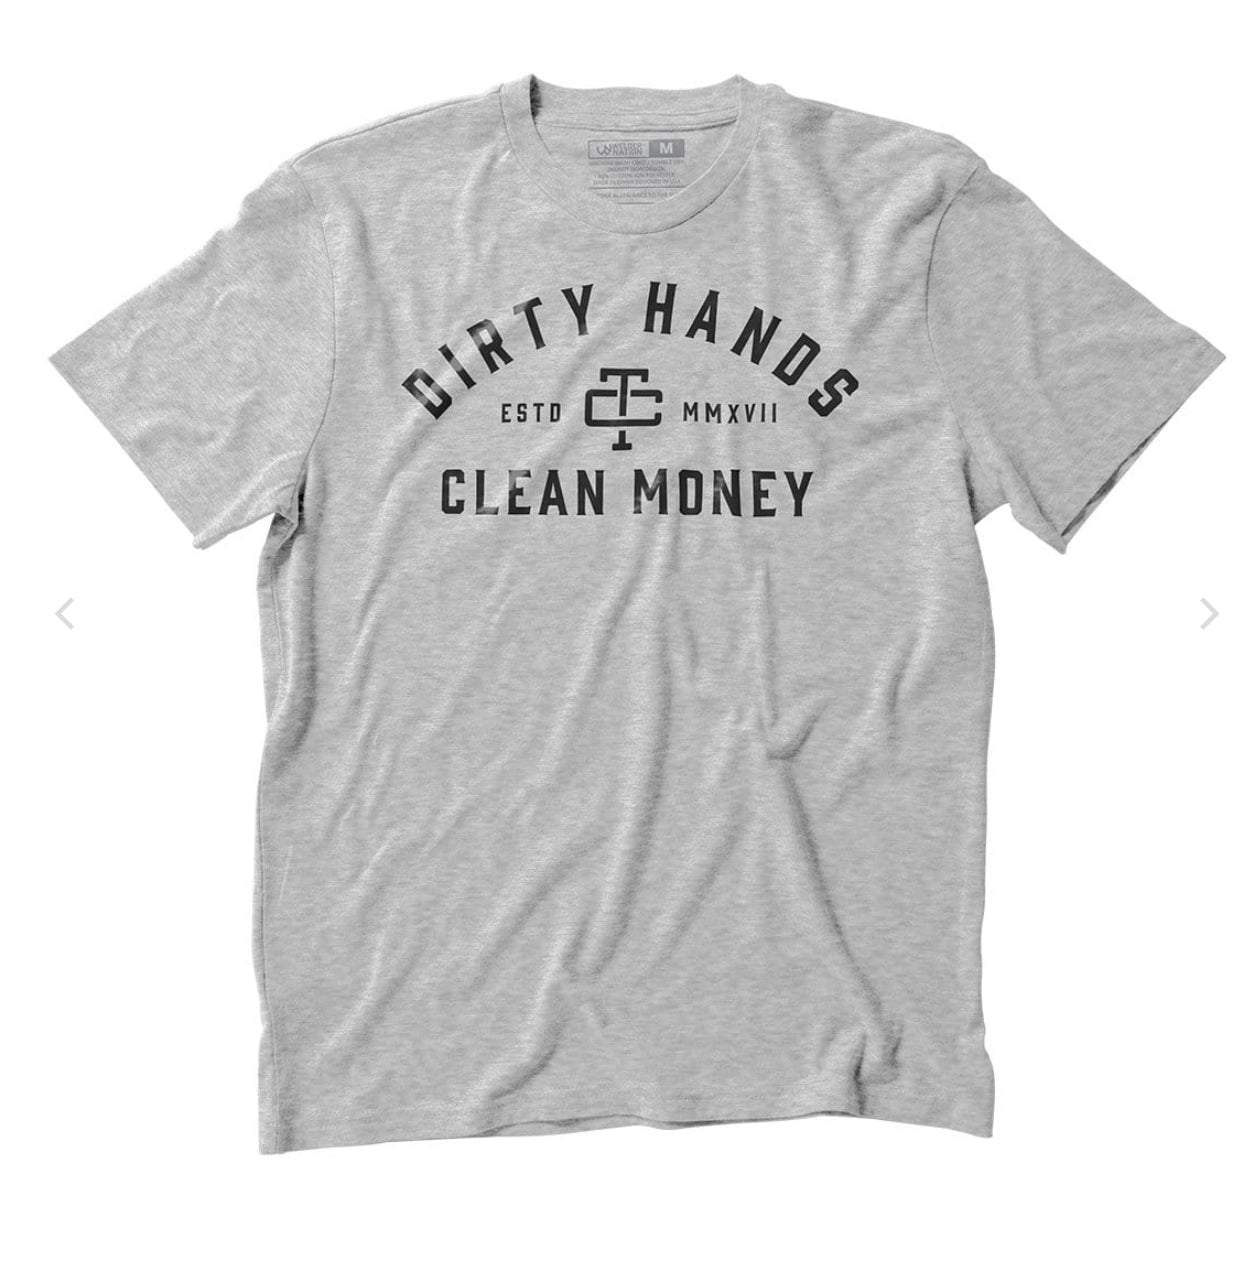 DIRTY HANDS CLEAN MONEY CLASSIC TEE